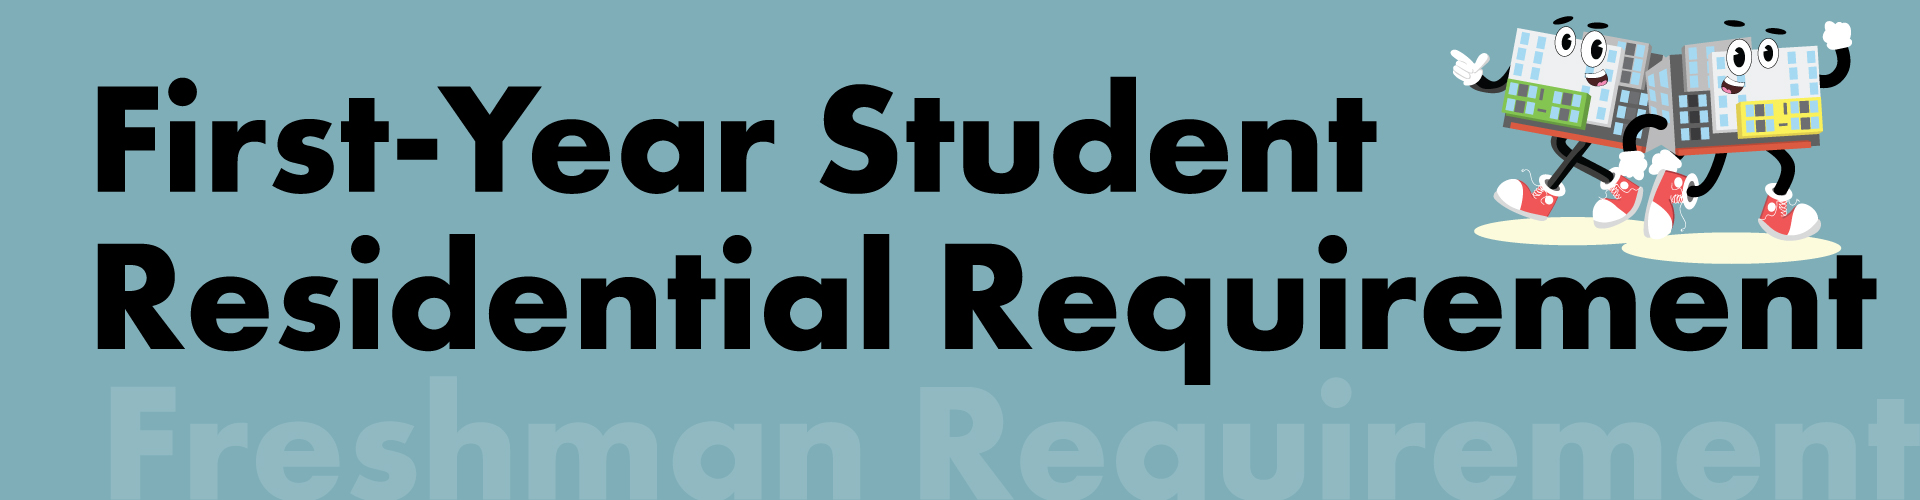 First-Year Student Residential Requirement